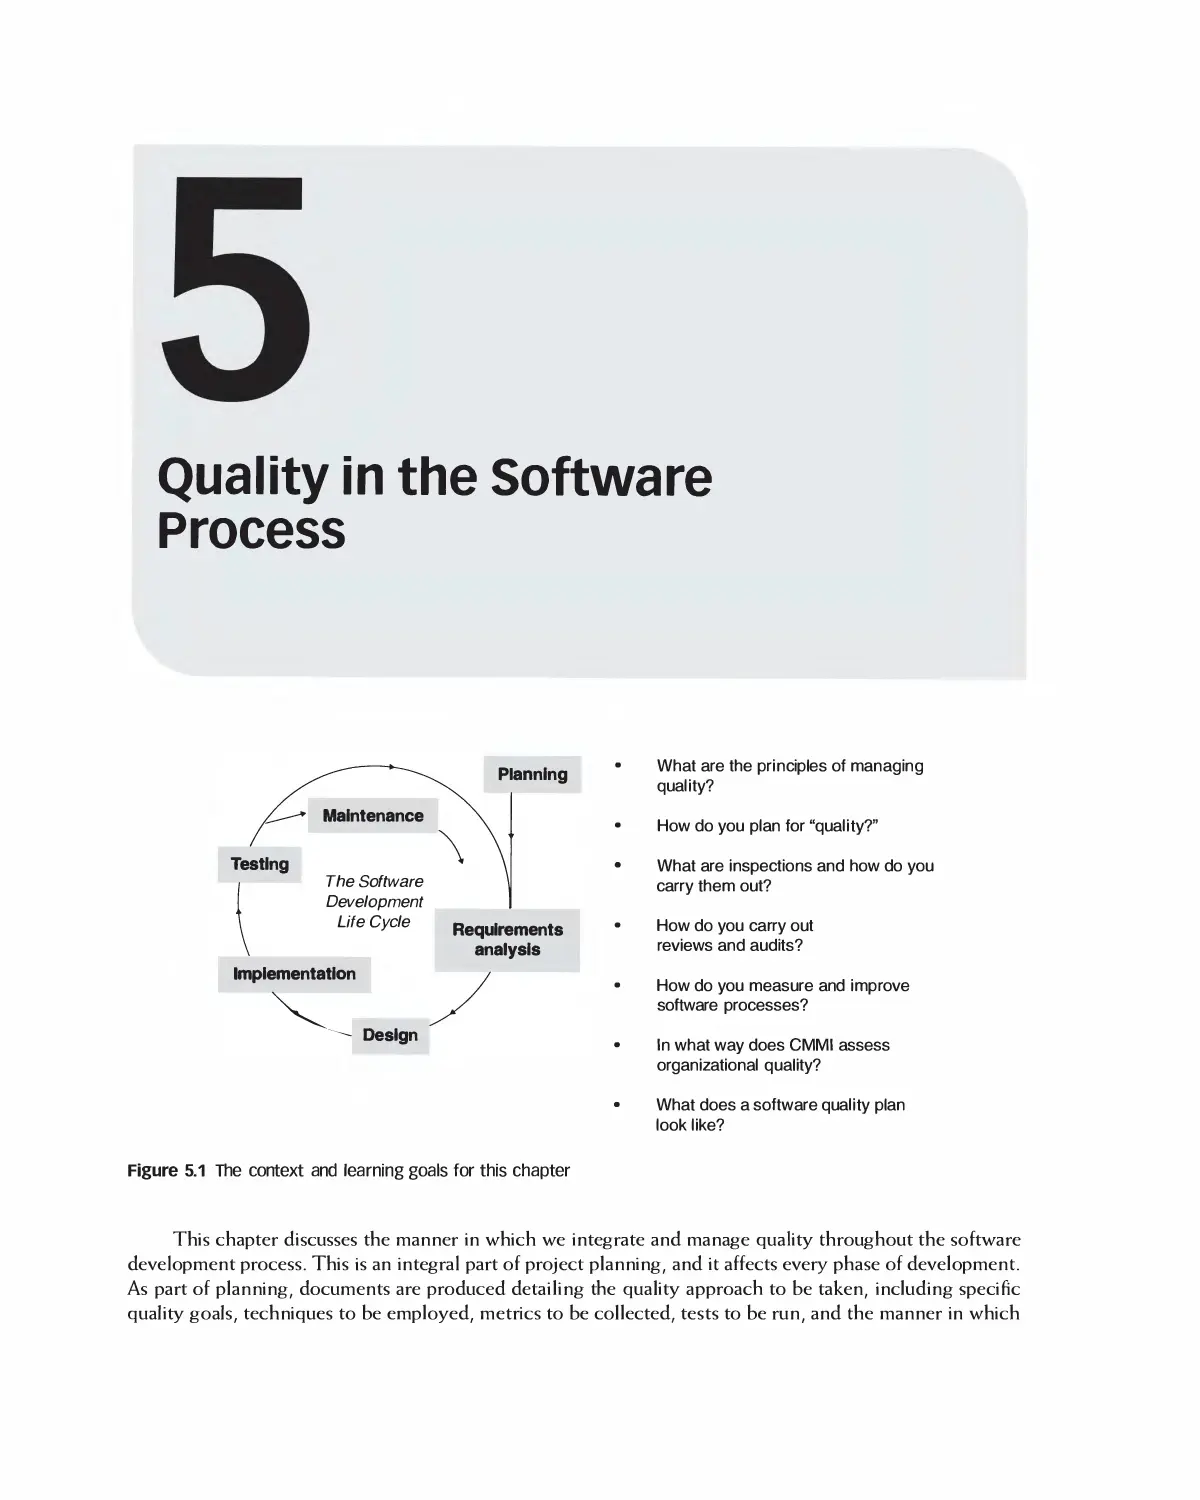 Chapter 5: Quality in the Software Process